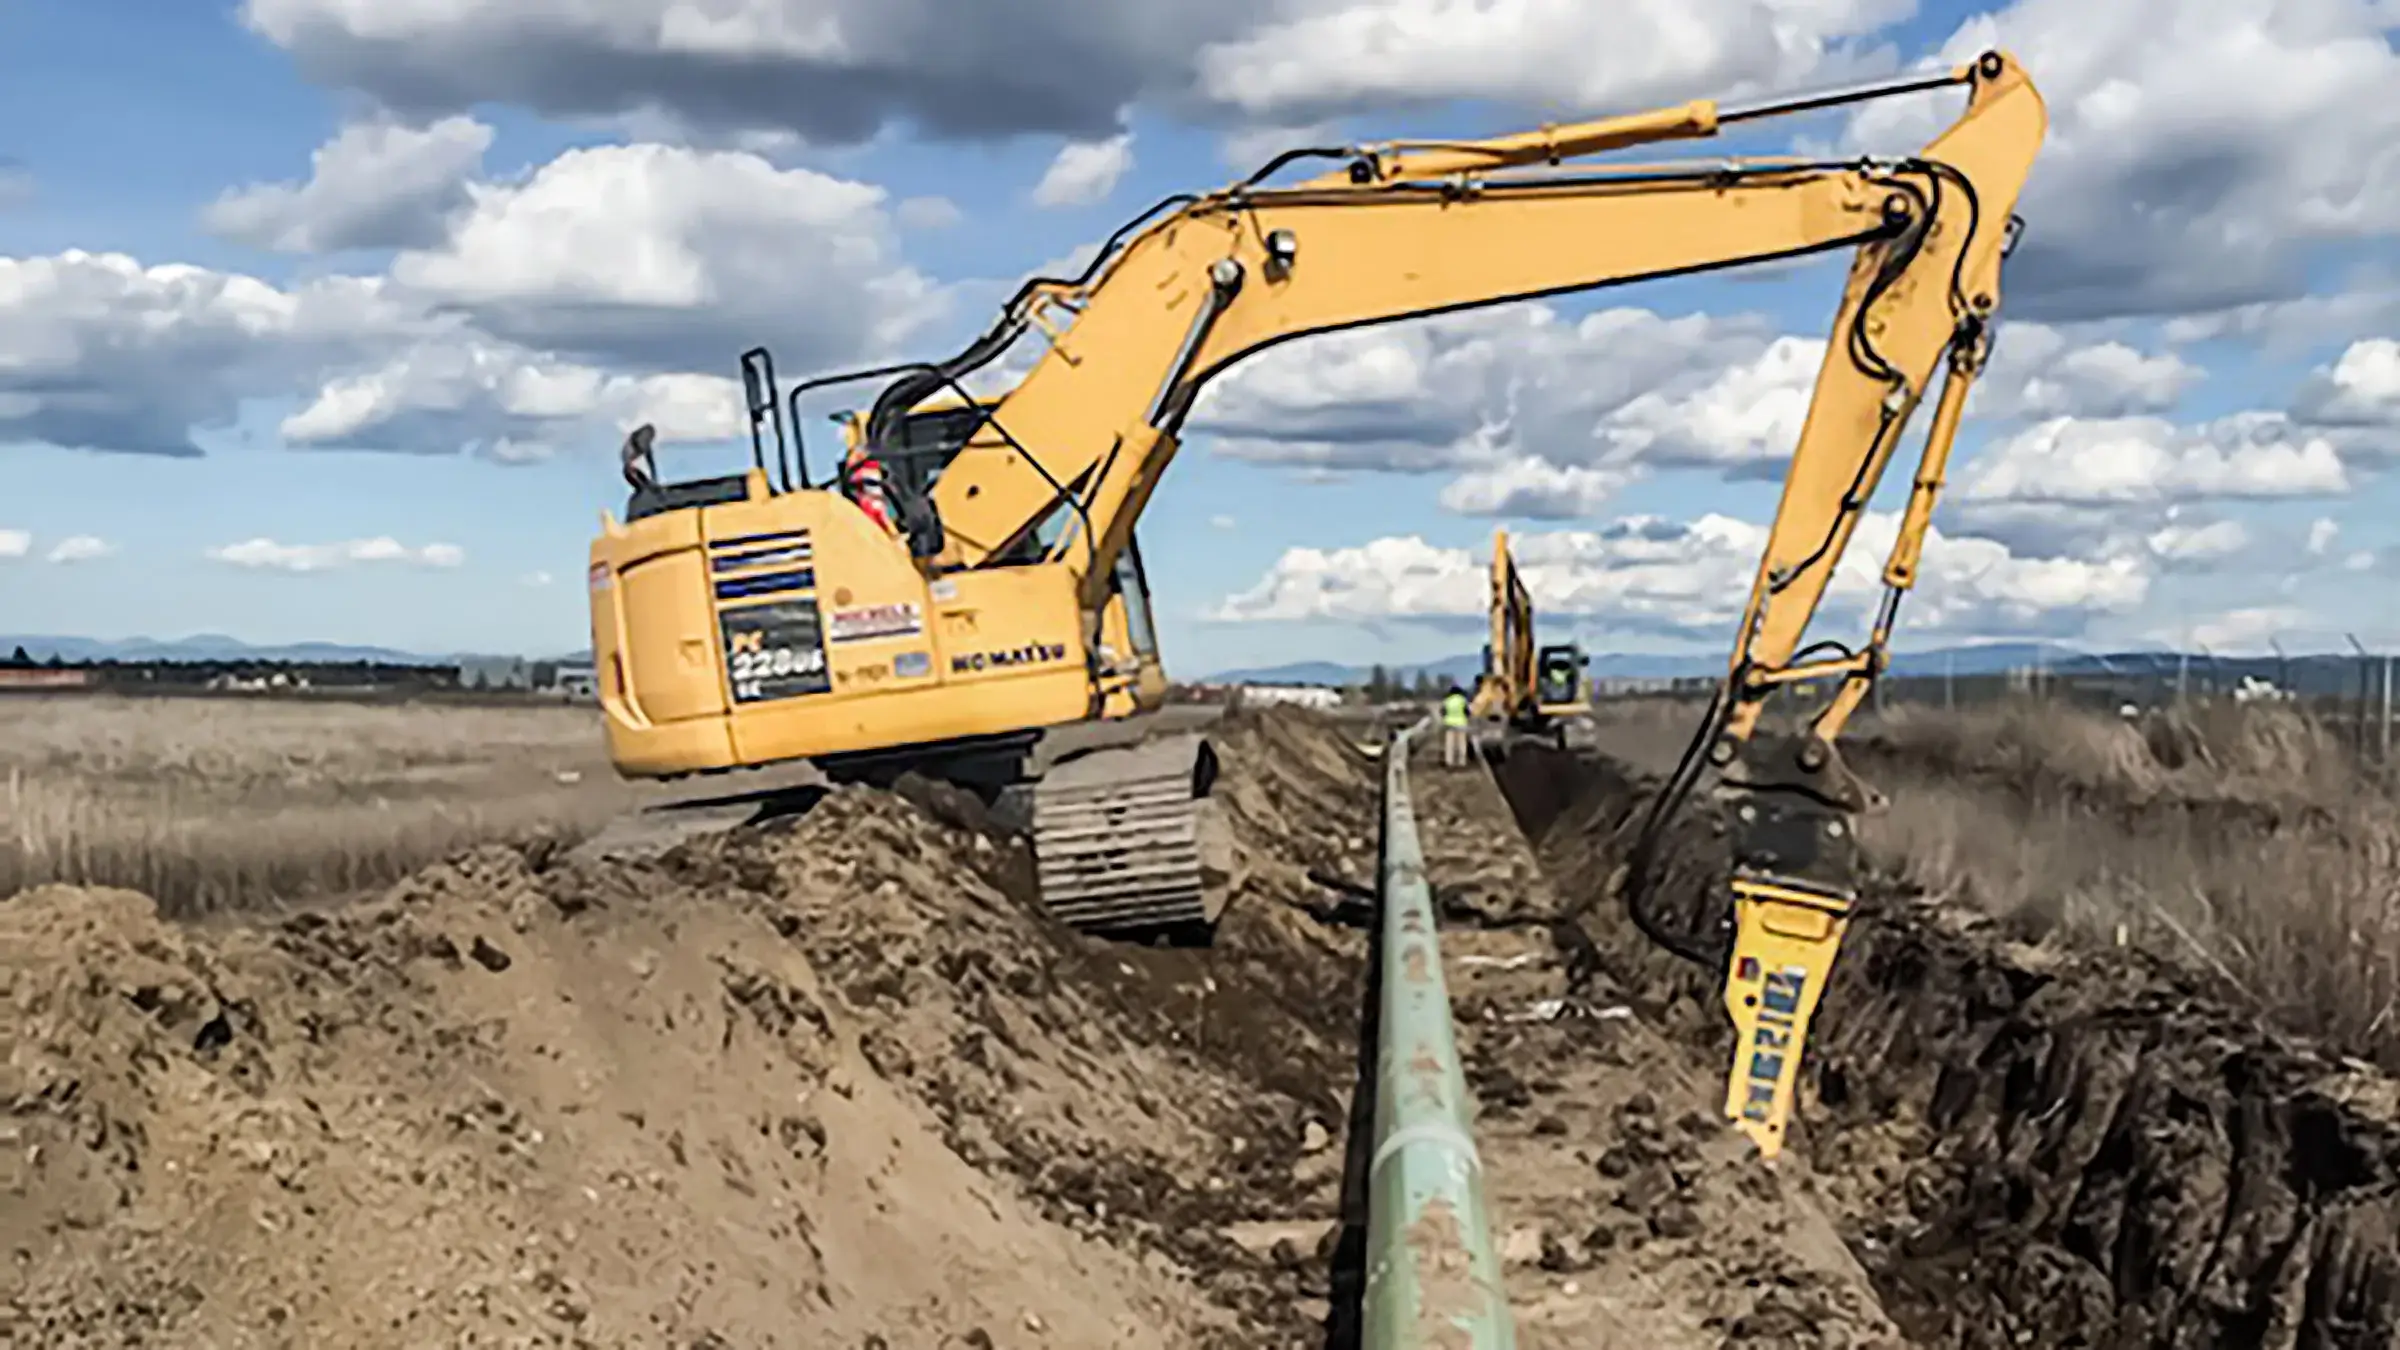 Several excavators assist in digging out a trench for a pipeline to be placed